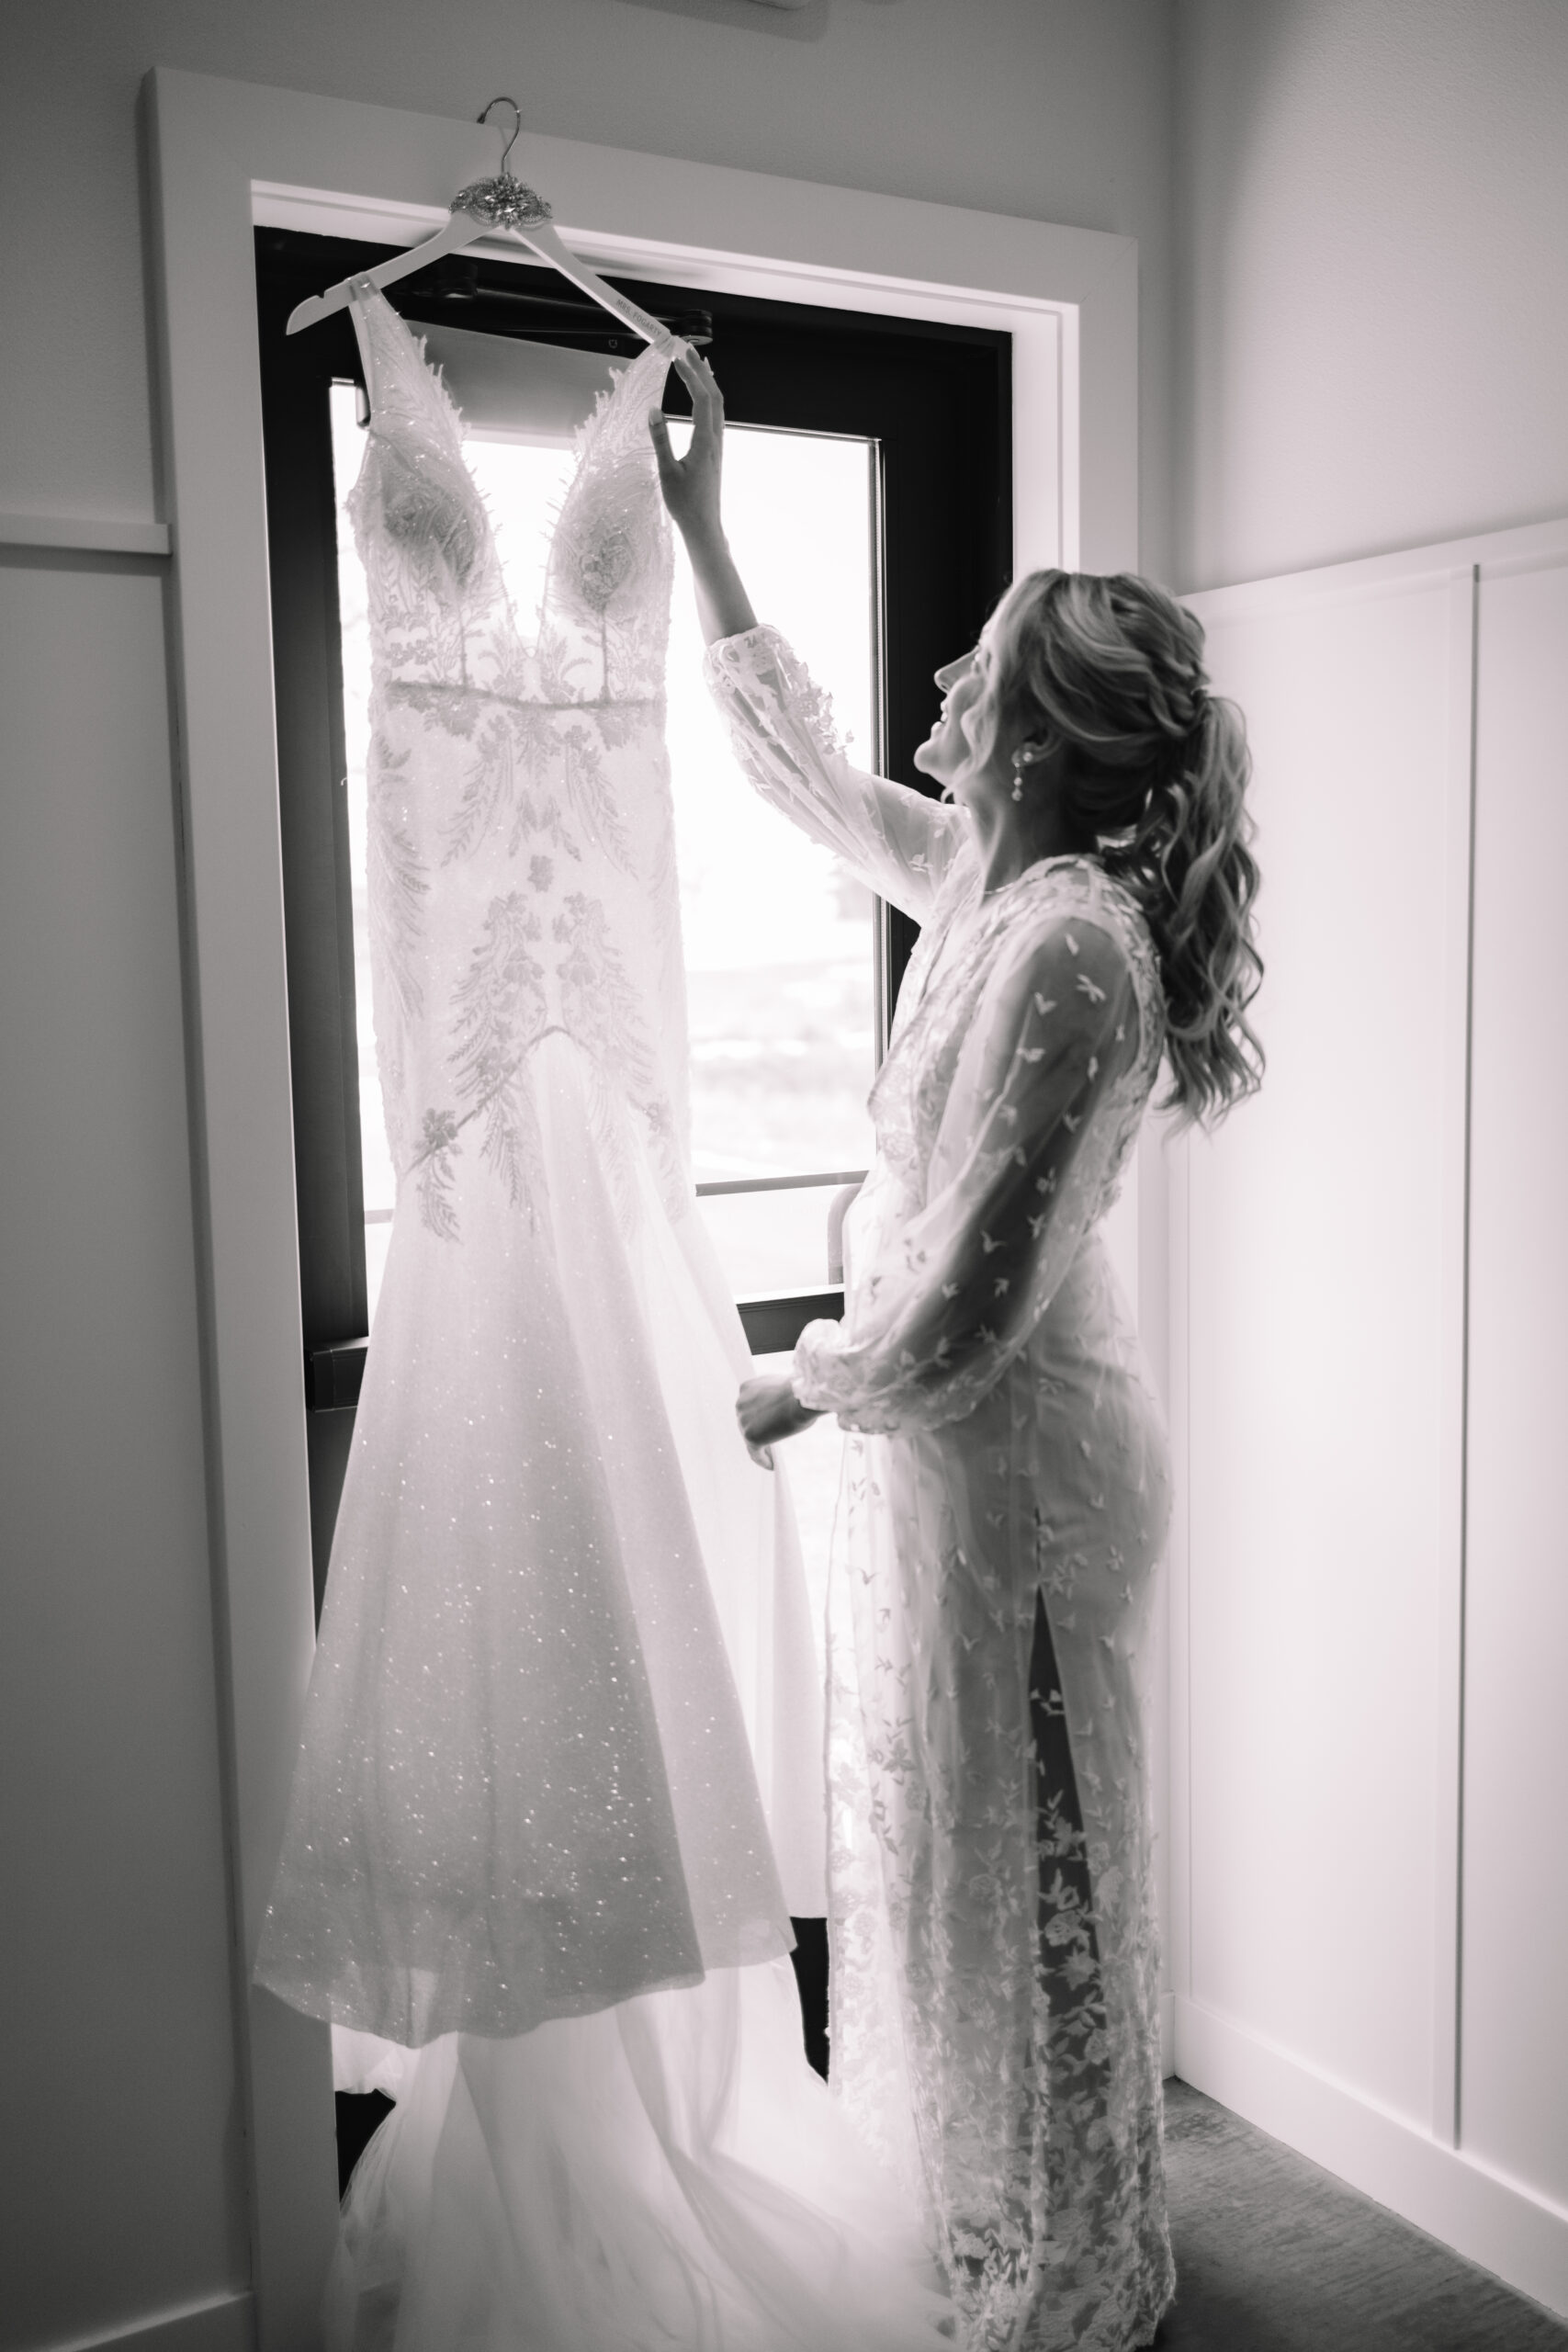 Wedding shot of a Bride admiring her wedding dress hanging from a door next to a window, with the light shining through illuminating the details of the dress